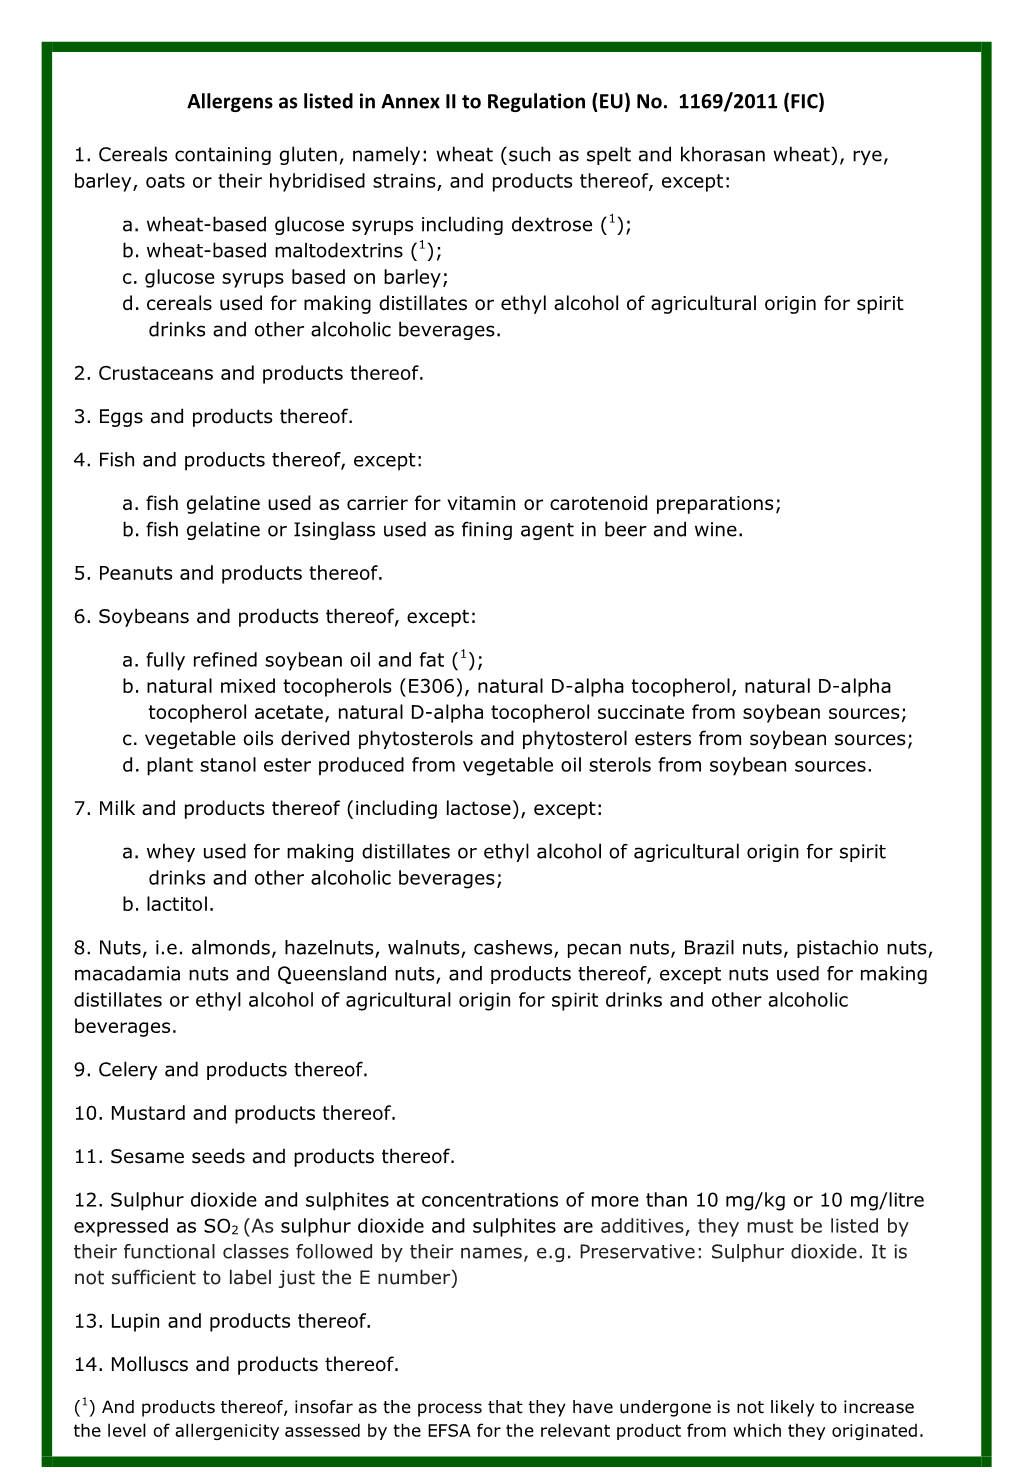 Allergens As Listed in Annex II to Regulation (EU) No. 1169/2011 (FIC)